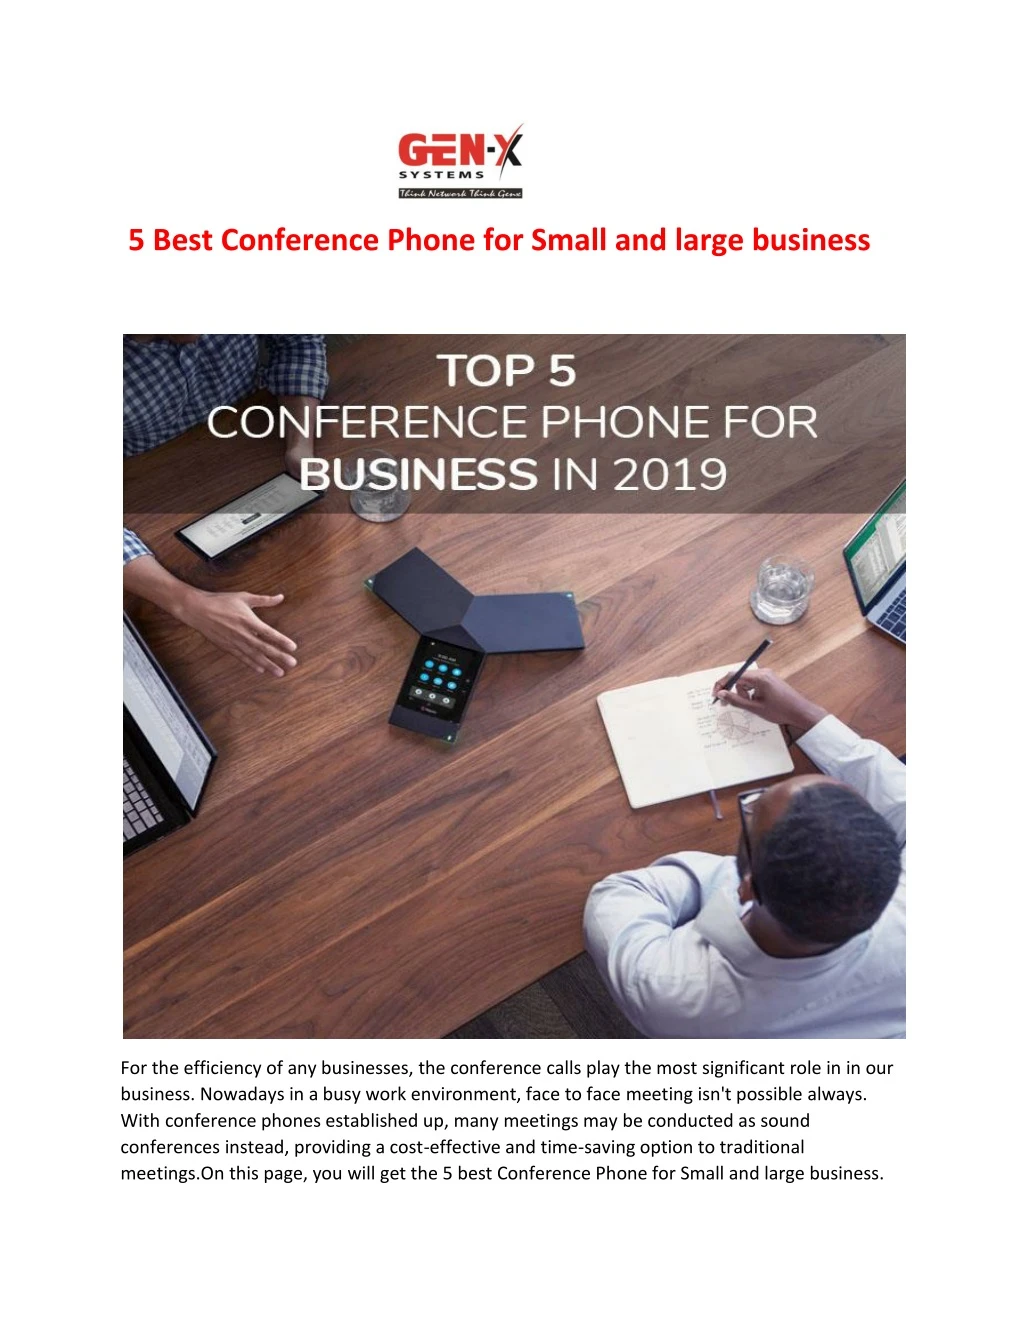 5 best conference phone for small and large